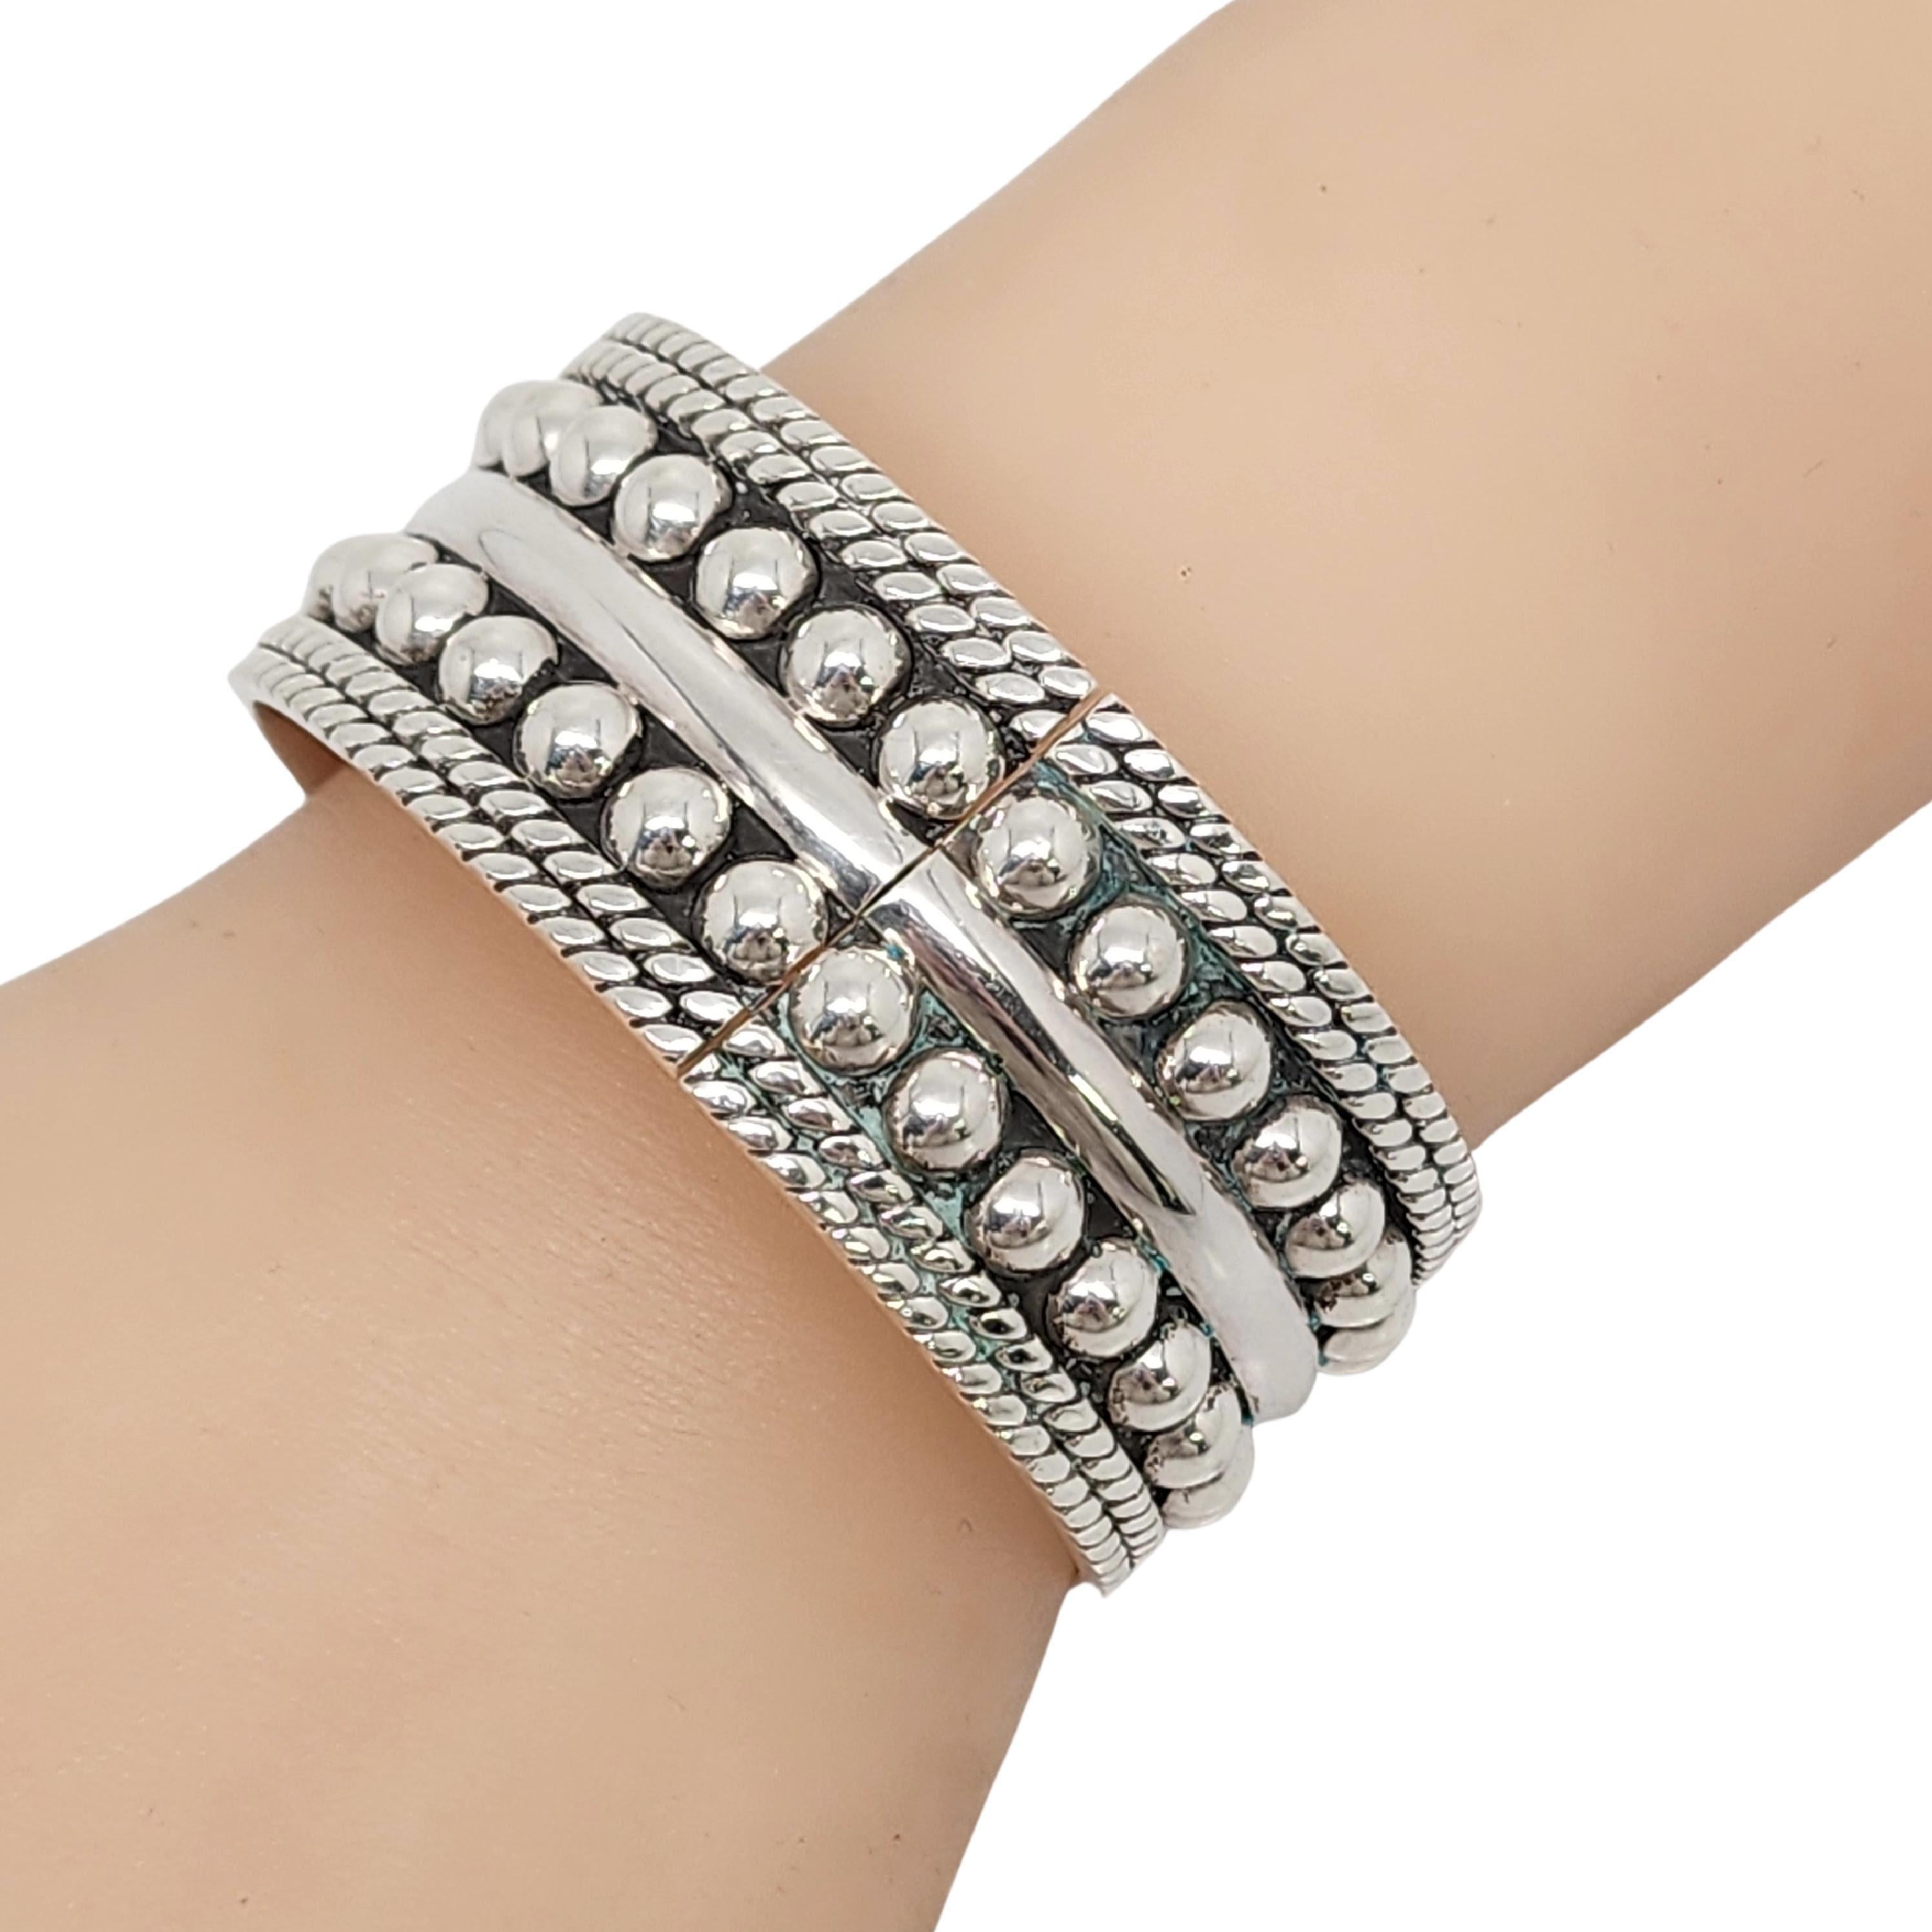 Taxco Mexico TH-117 Sterling Silver Wide Bead Hinged Bangle Bracelet #16442 4